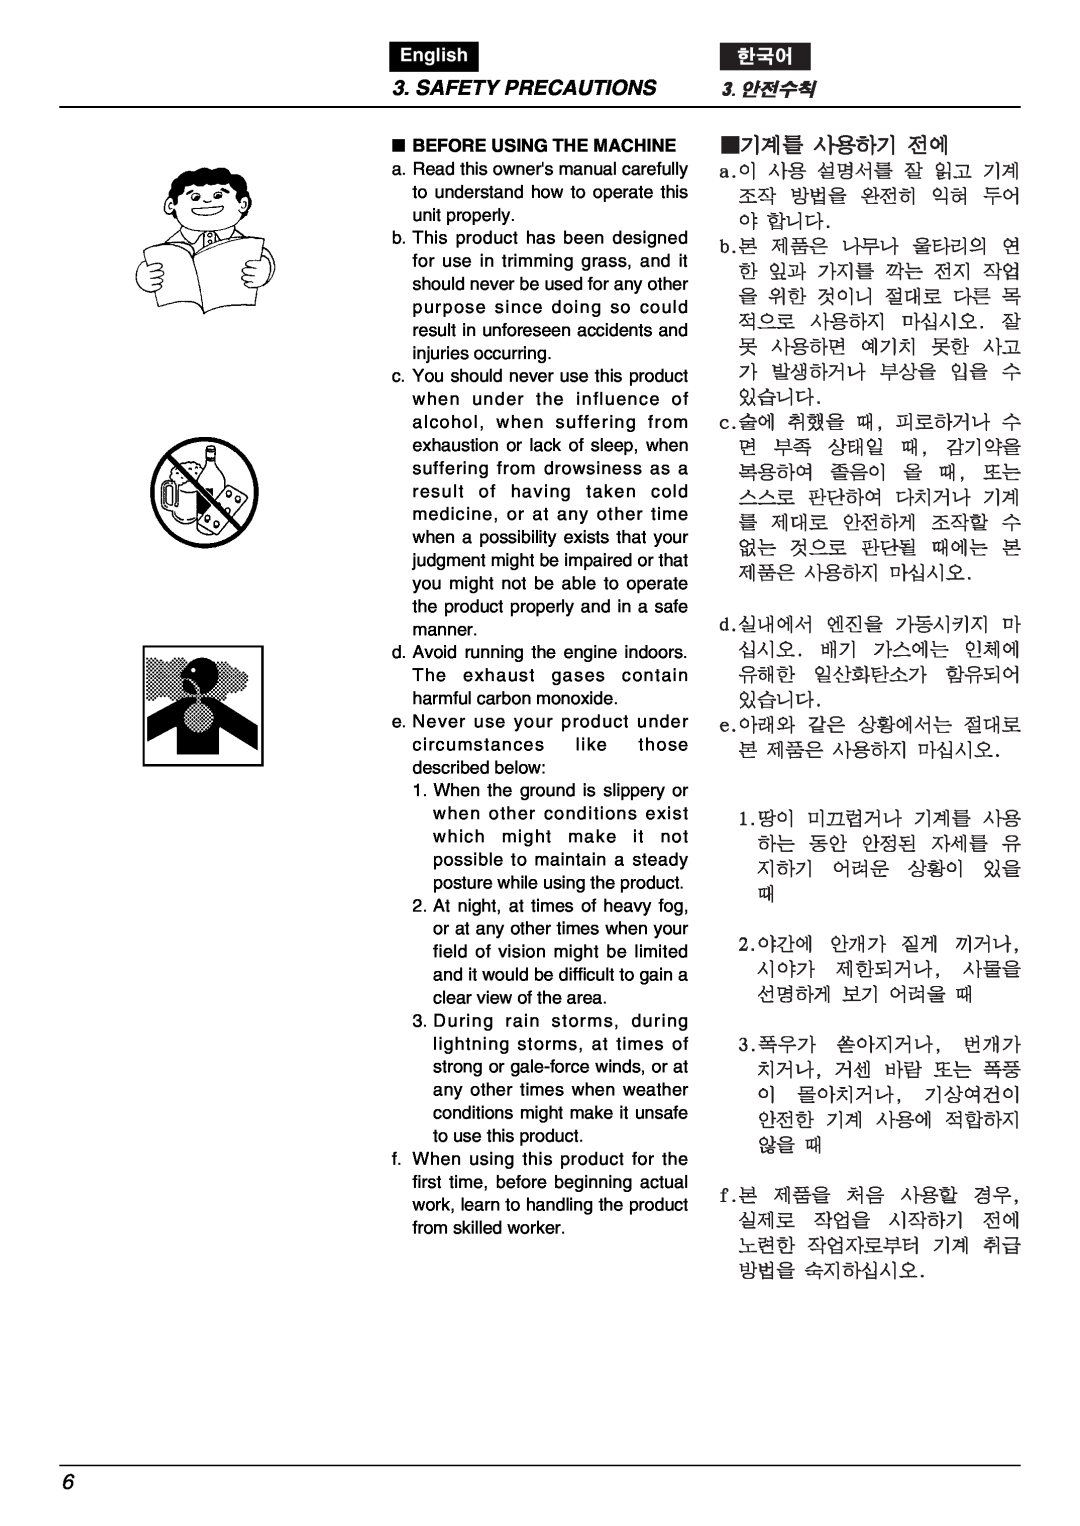 Zenoah BK2650DL-Hb owner manual Safety Precautions, English, BEFORE USING THE MACHINE a. Read this owners manual carefully 